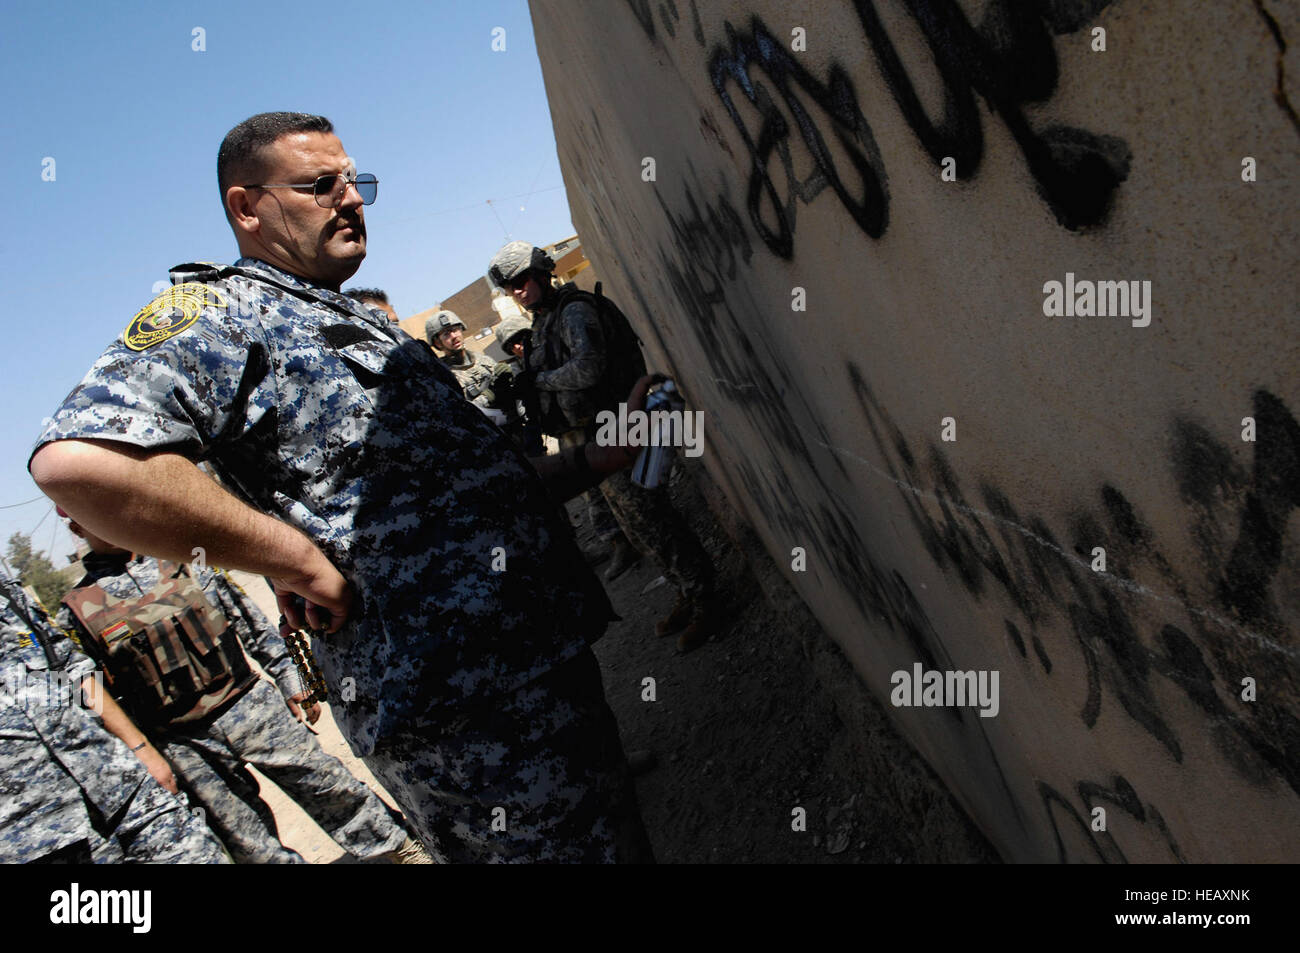 An Iraqi police officer writes through an insurgent's effort to promote propaganda on a school wall, during a cordon and search mission in the Al Siha District of  Mosul, Iraq, May 14. Iraqi police ensures the security of the Iraqi population by clearing and disrupting insurgent activity and showing a presence in neighborhoods throughout the city of Mosul. Stock Photo